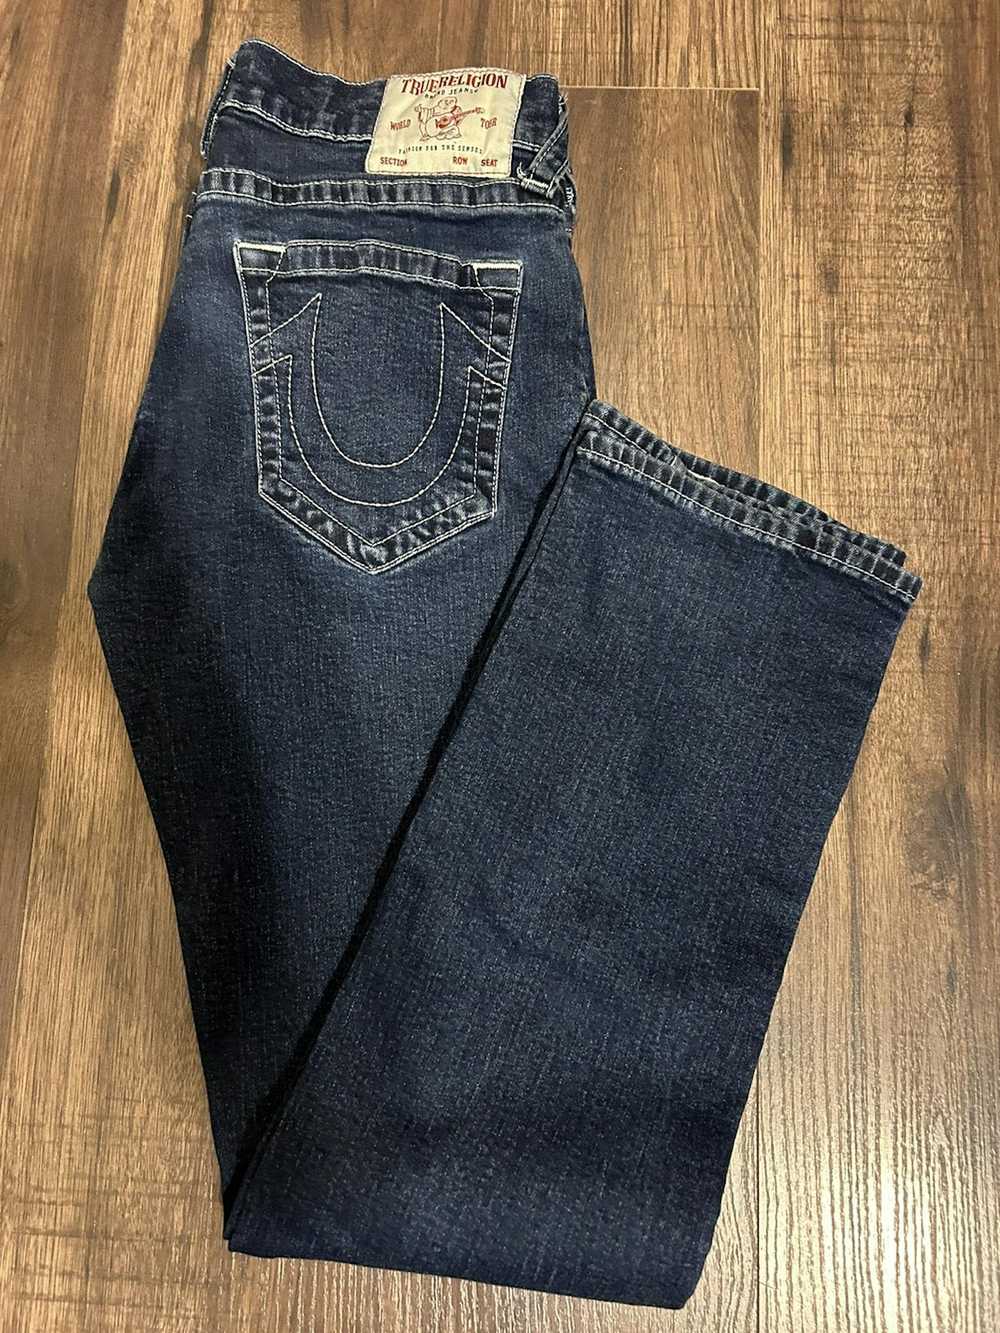 True Religion True religion relaxed straight jeans - image 2